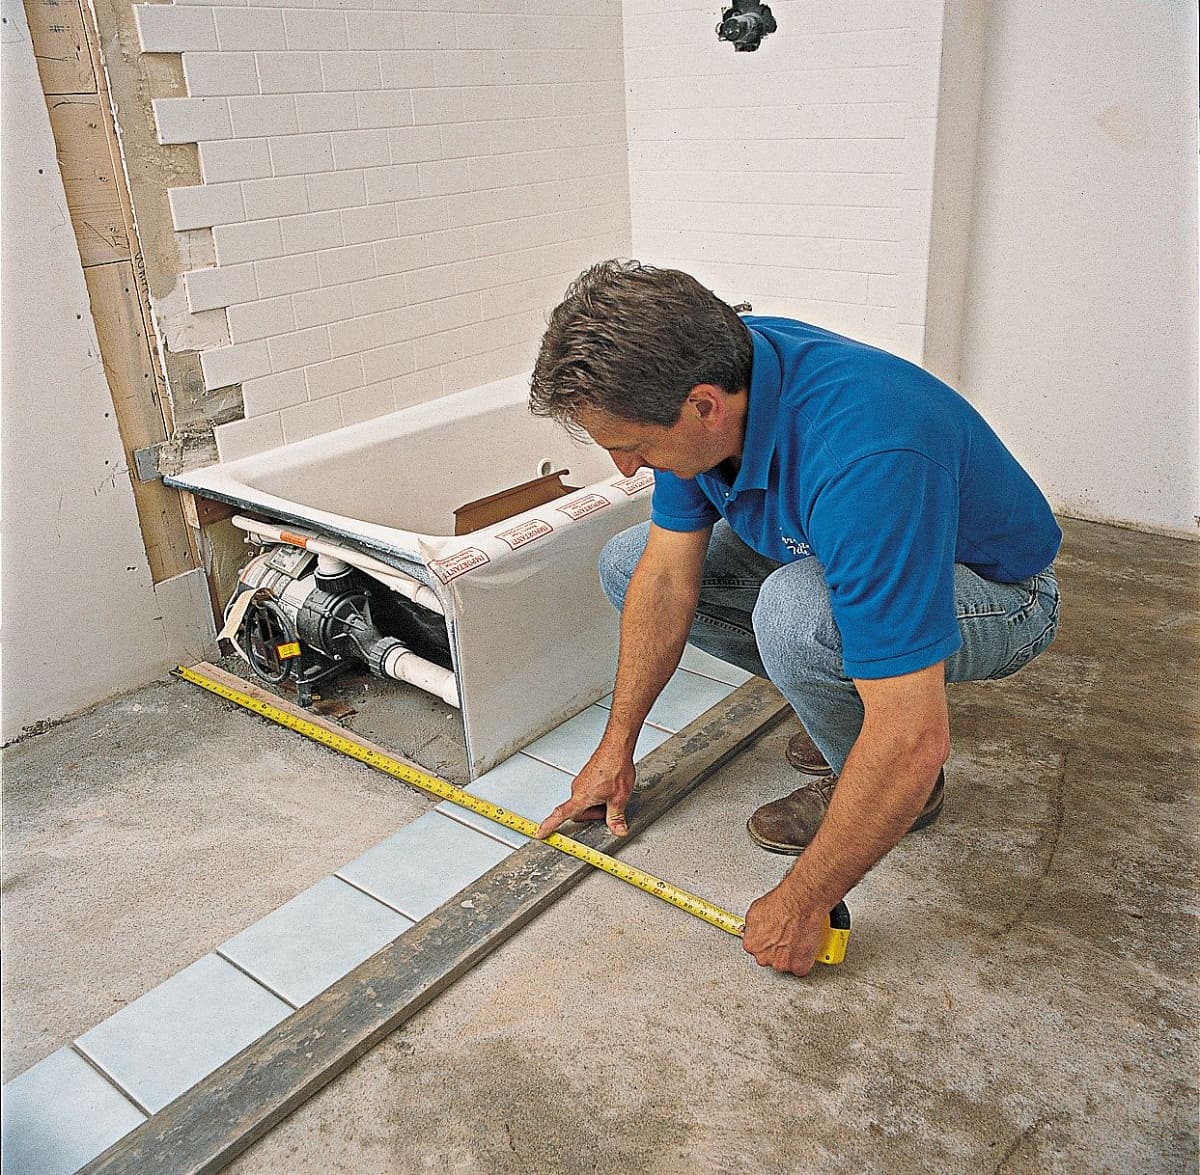 How To Measure Floor For Tile